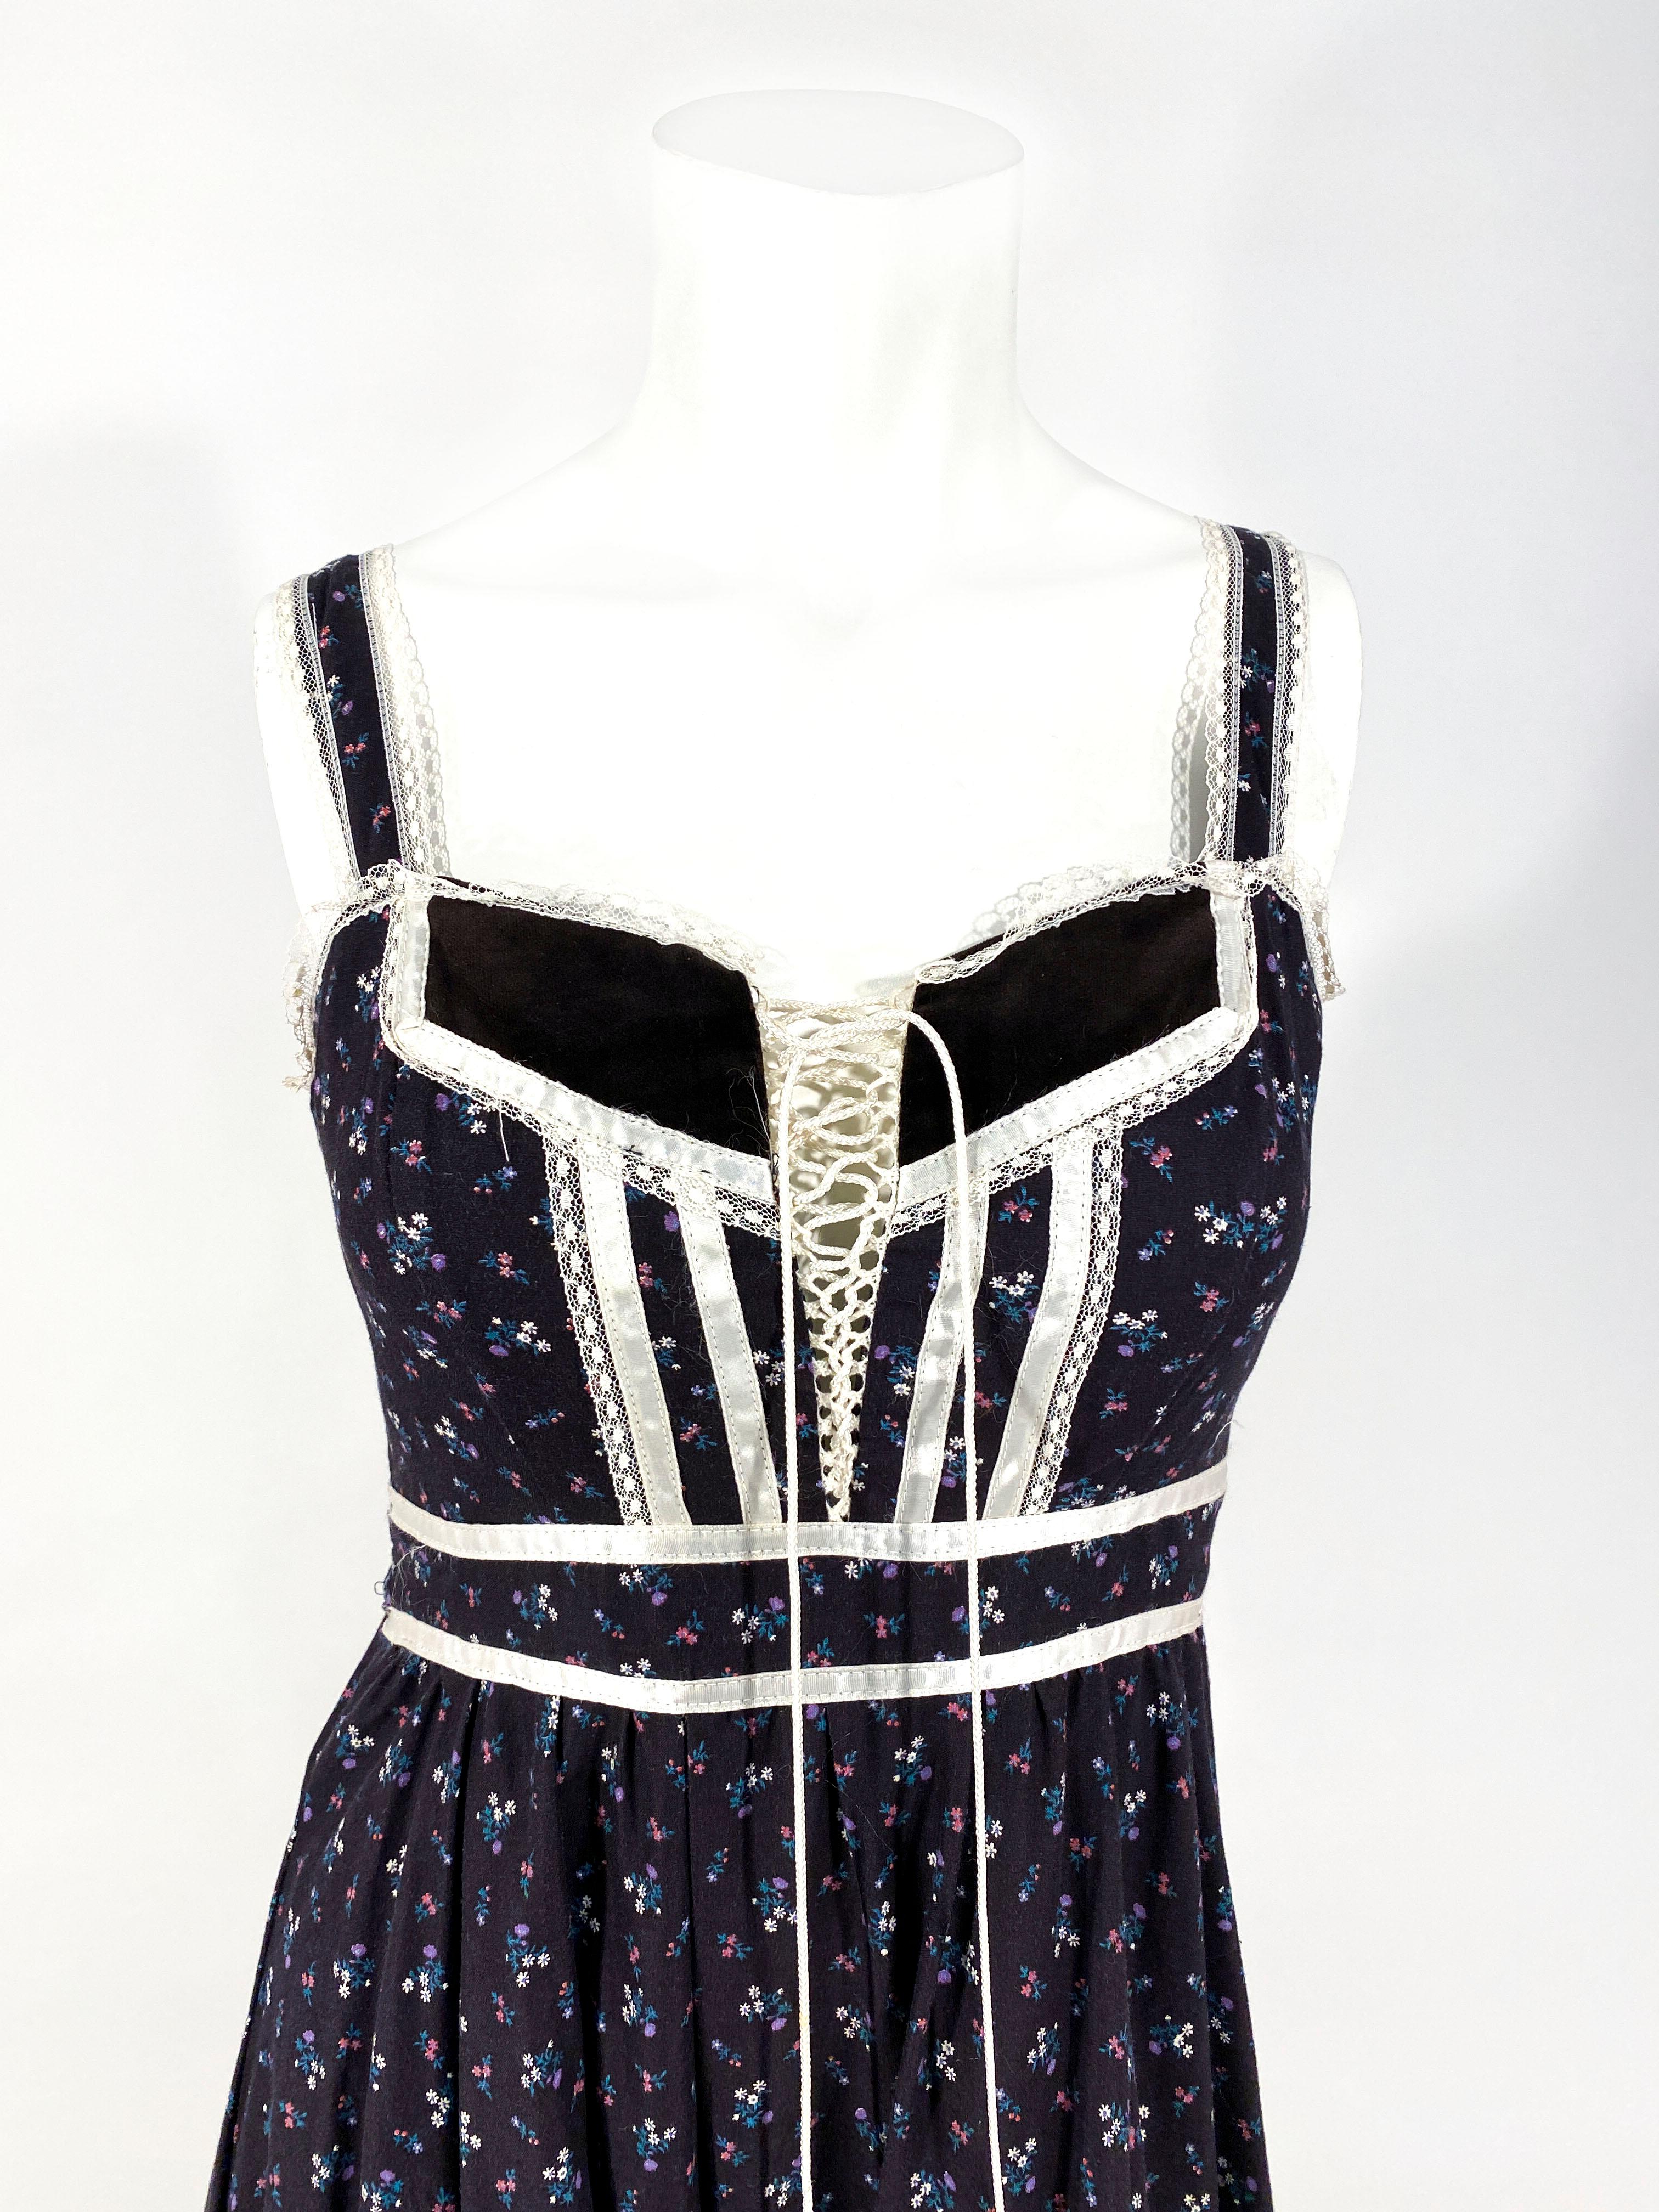 1970s Gunne Sax navy cottage dress featuring a floral calico print, satin and lace trim, velvet lace up bodice, a wide ruffled hem, and an applied sash that ties in the back over the zipper closure. 